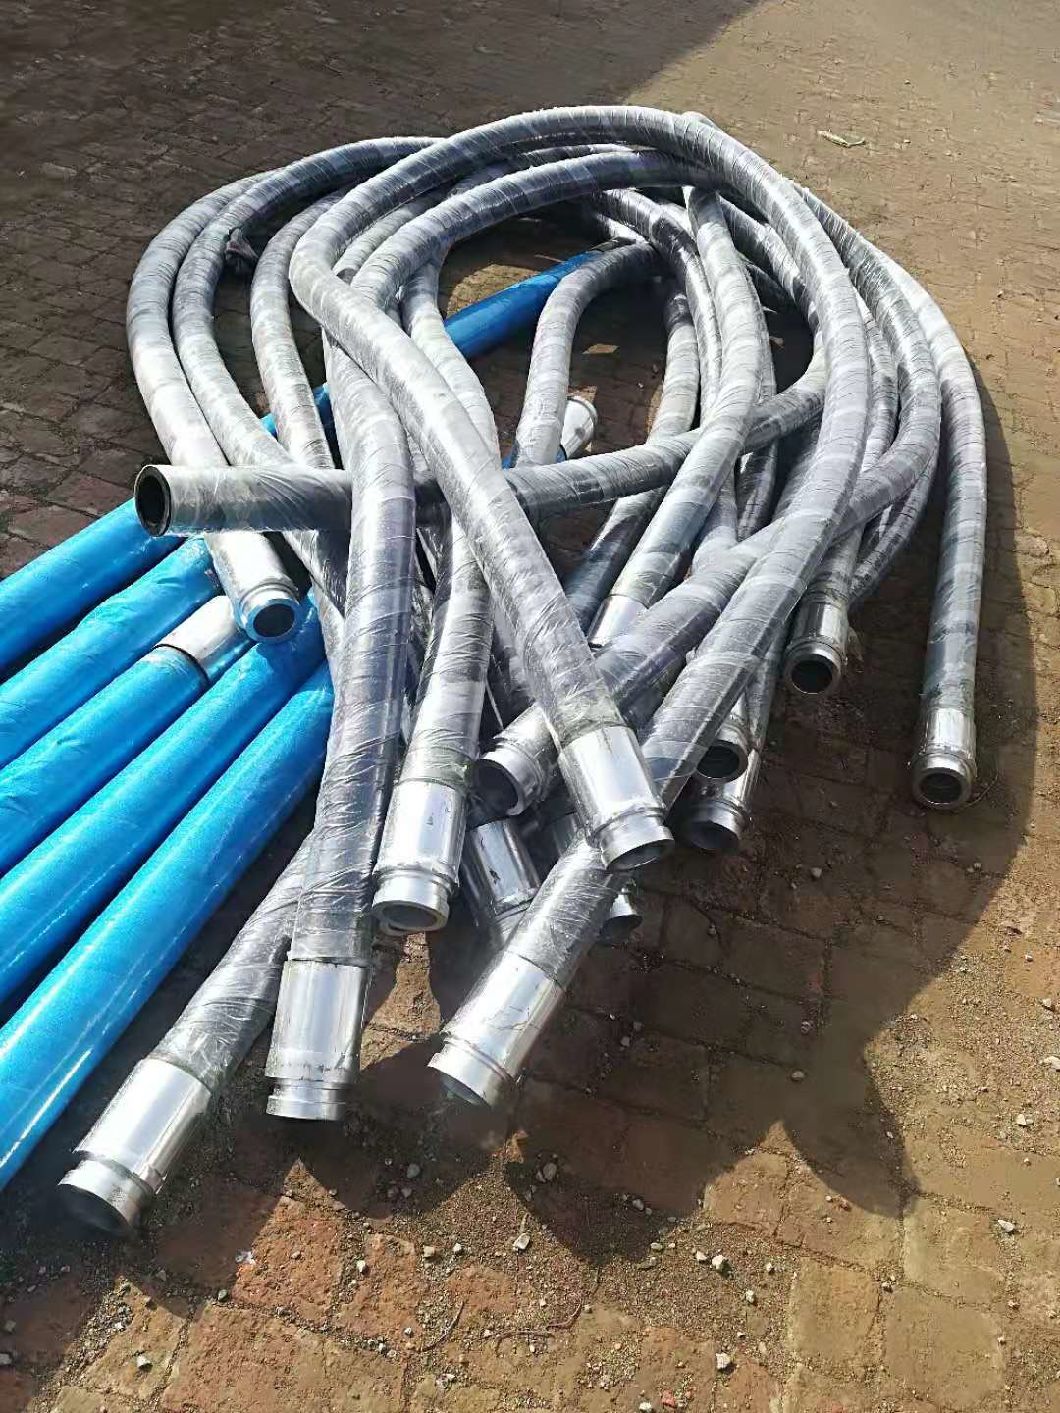 Best Quality Rubber Hose Pipe with Fabric Reinforced